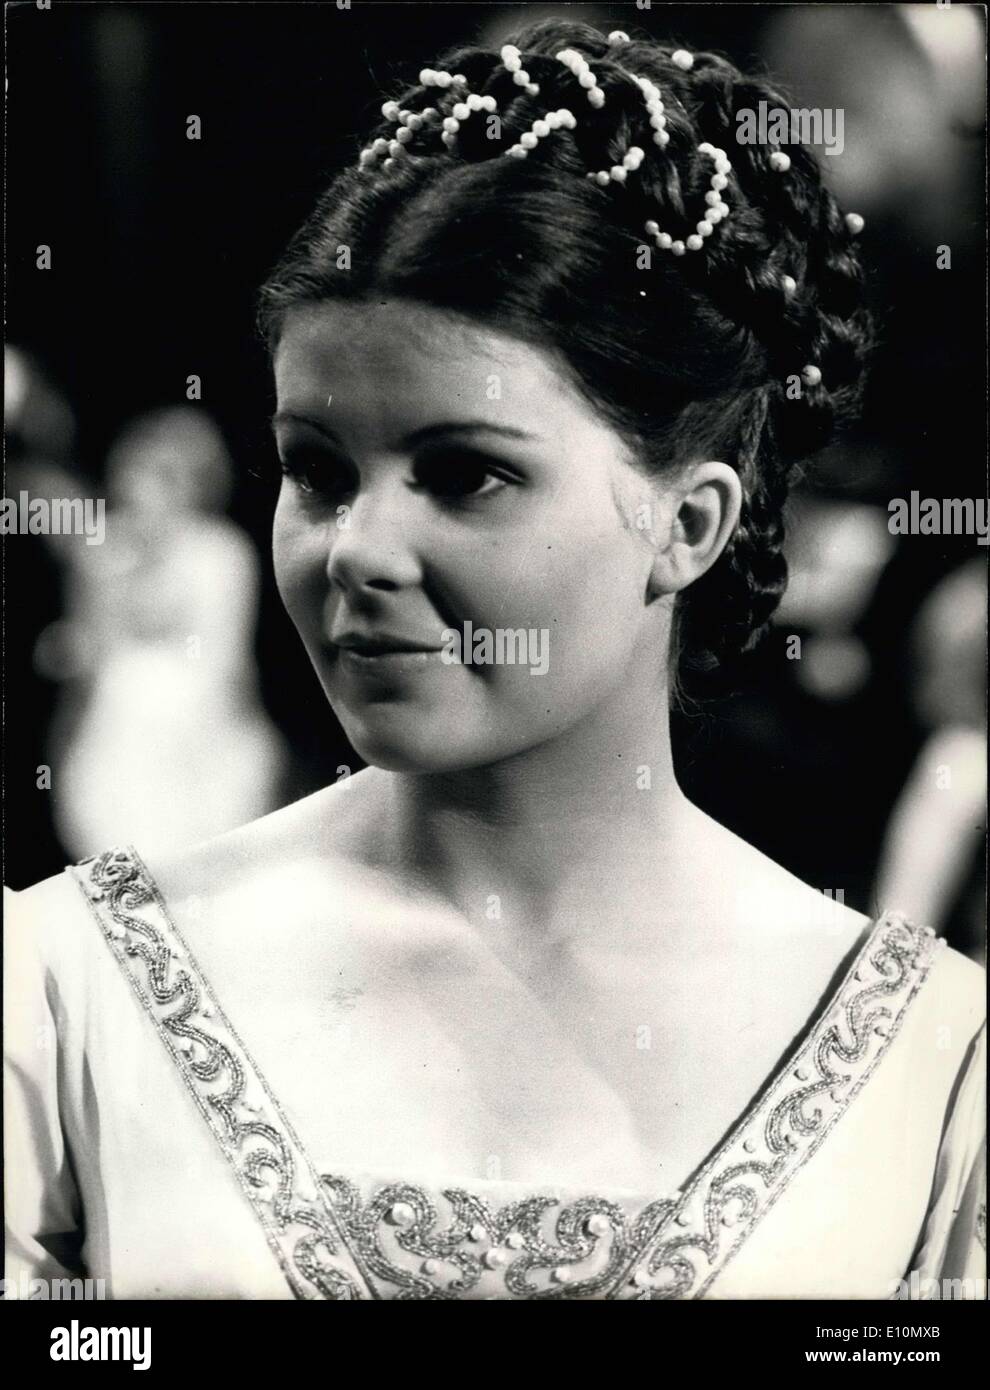 Jun. 20, 1973 - Jean-Louis Broust and Nathalie Juvet are ''Romeo and Juliet'', the heros of the famous play by William Shakespeare, produced in its French version and adapted for the television by Claude Barma. Picture: Nathalie Juvet as Juliette during filming. Stock Photo